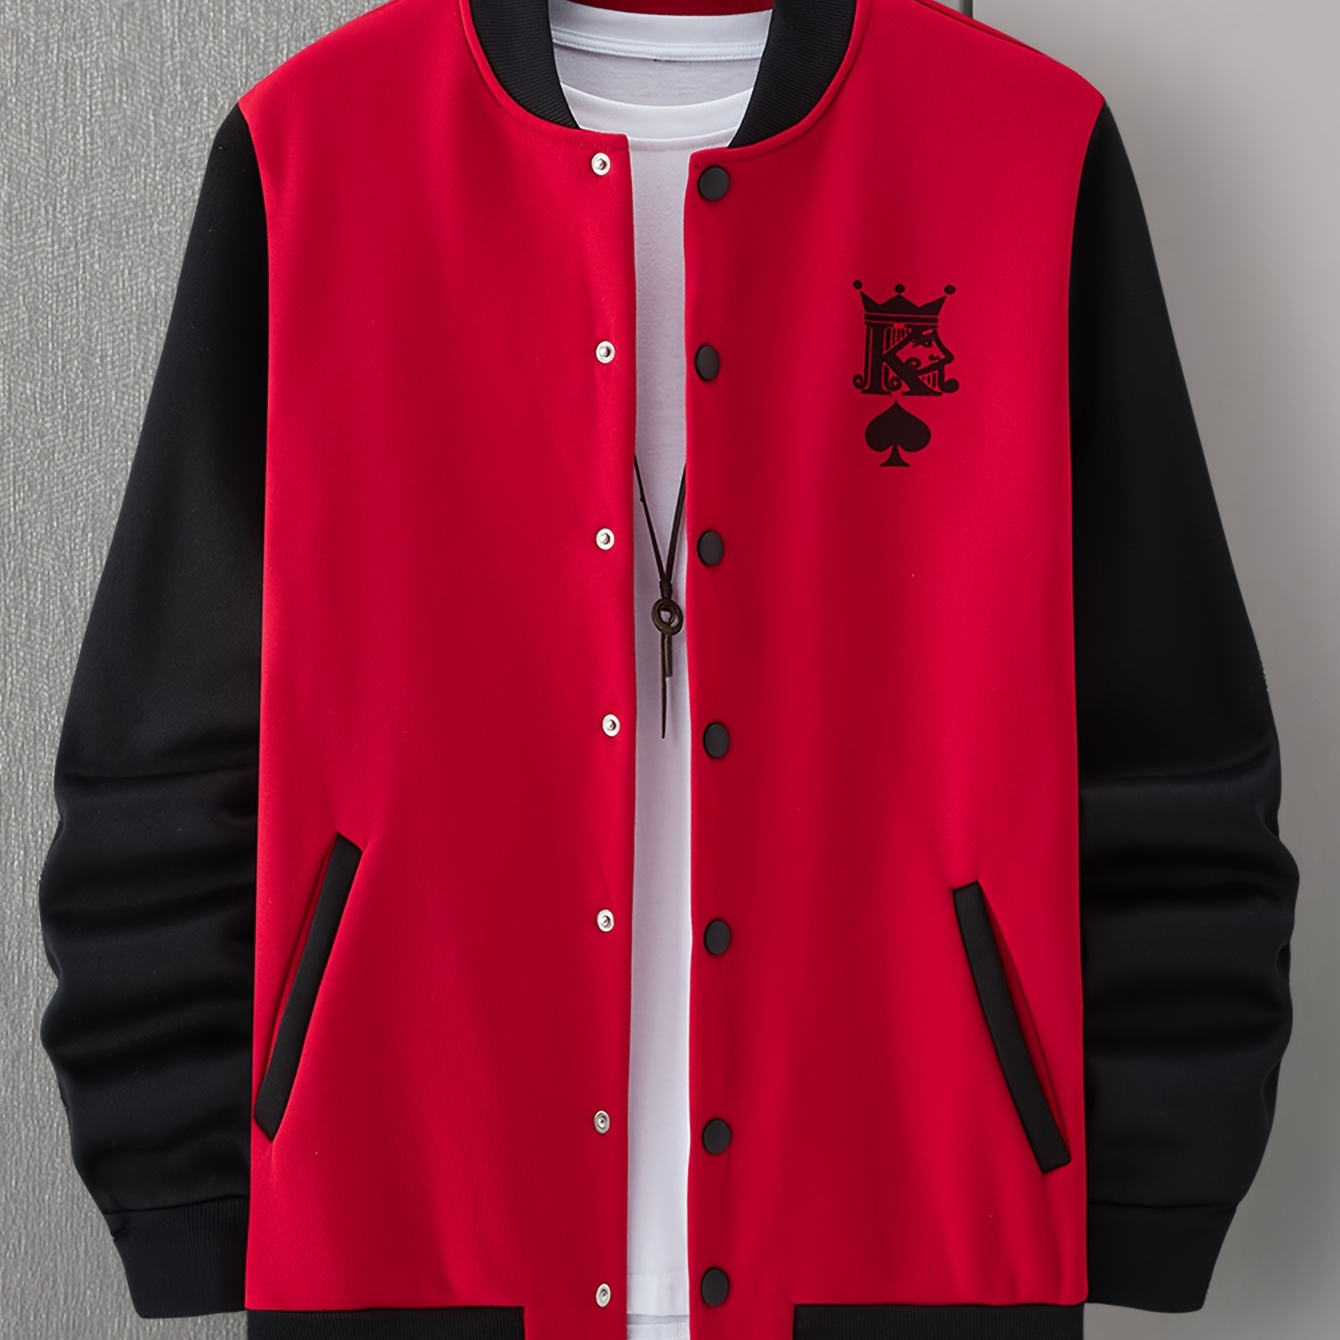 

Letter K Print Varsity Jacket Without Hoodie, Men's Casual Crew Neck Jackets By Activity For Teenagers School